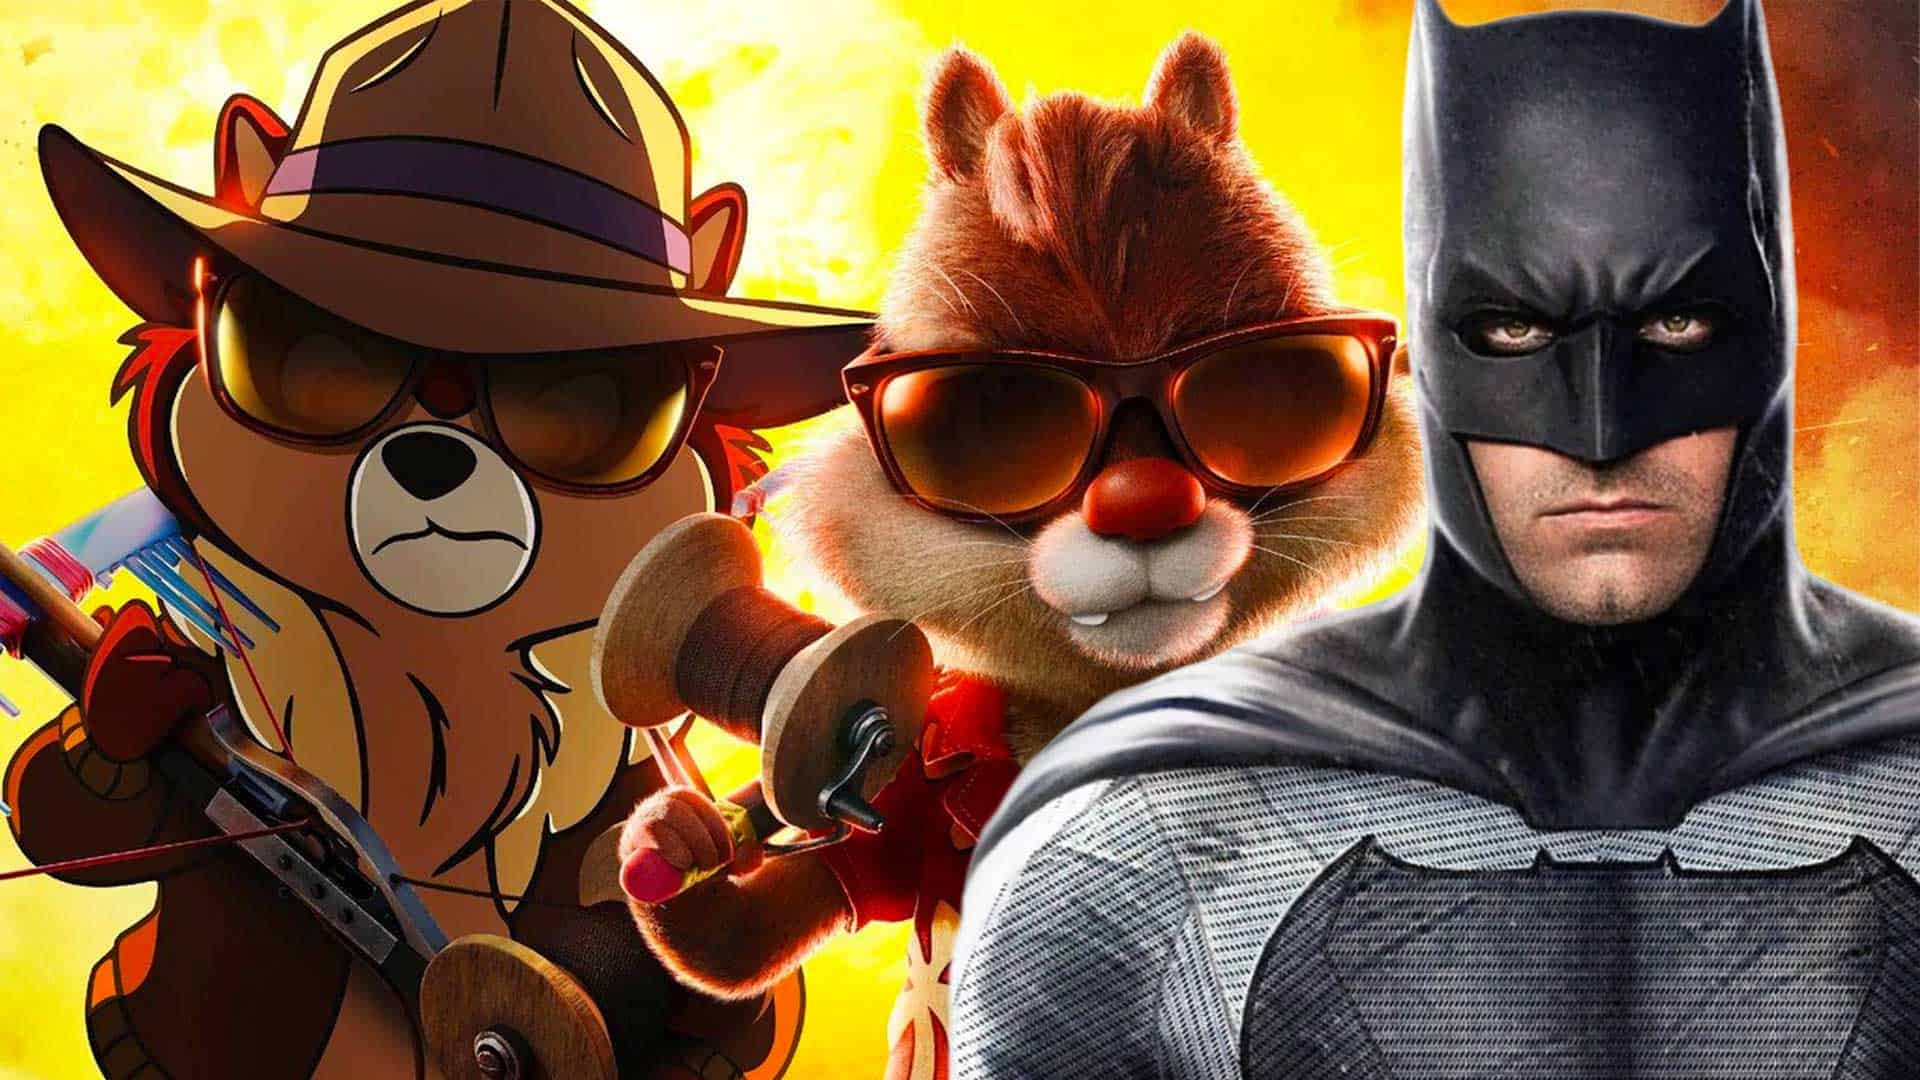 Zack Snyder's Batman Joins The Disney Universe In Chip And Dale